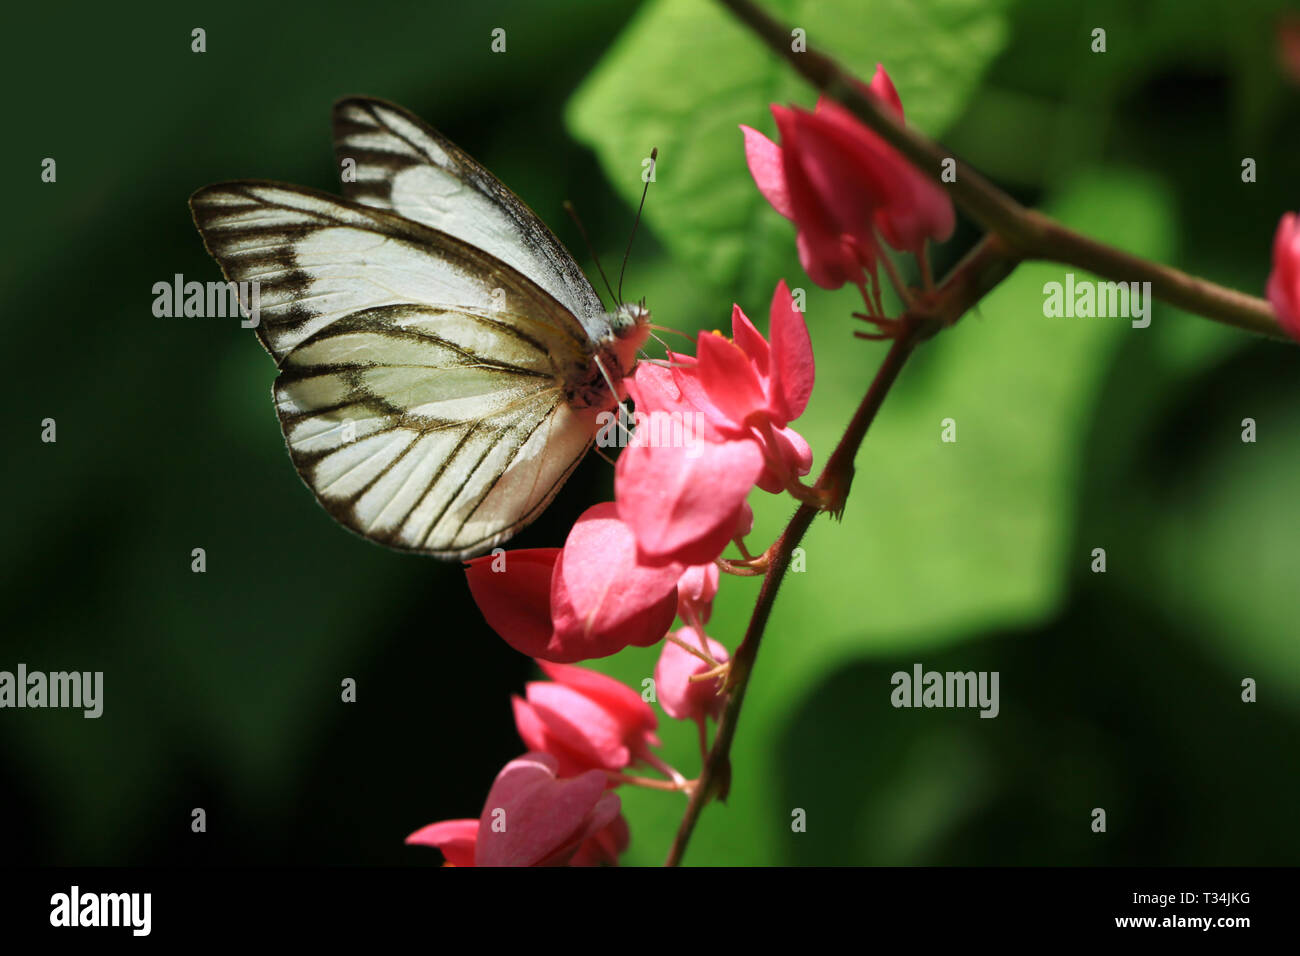 Close-up of a butterfly, Malaysia Stock Photo